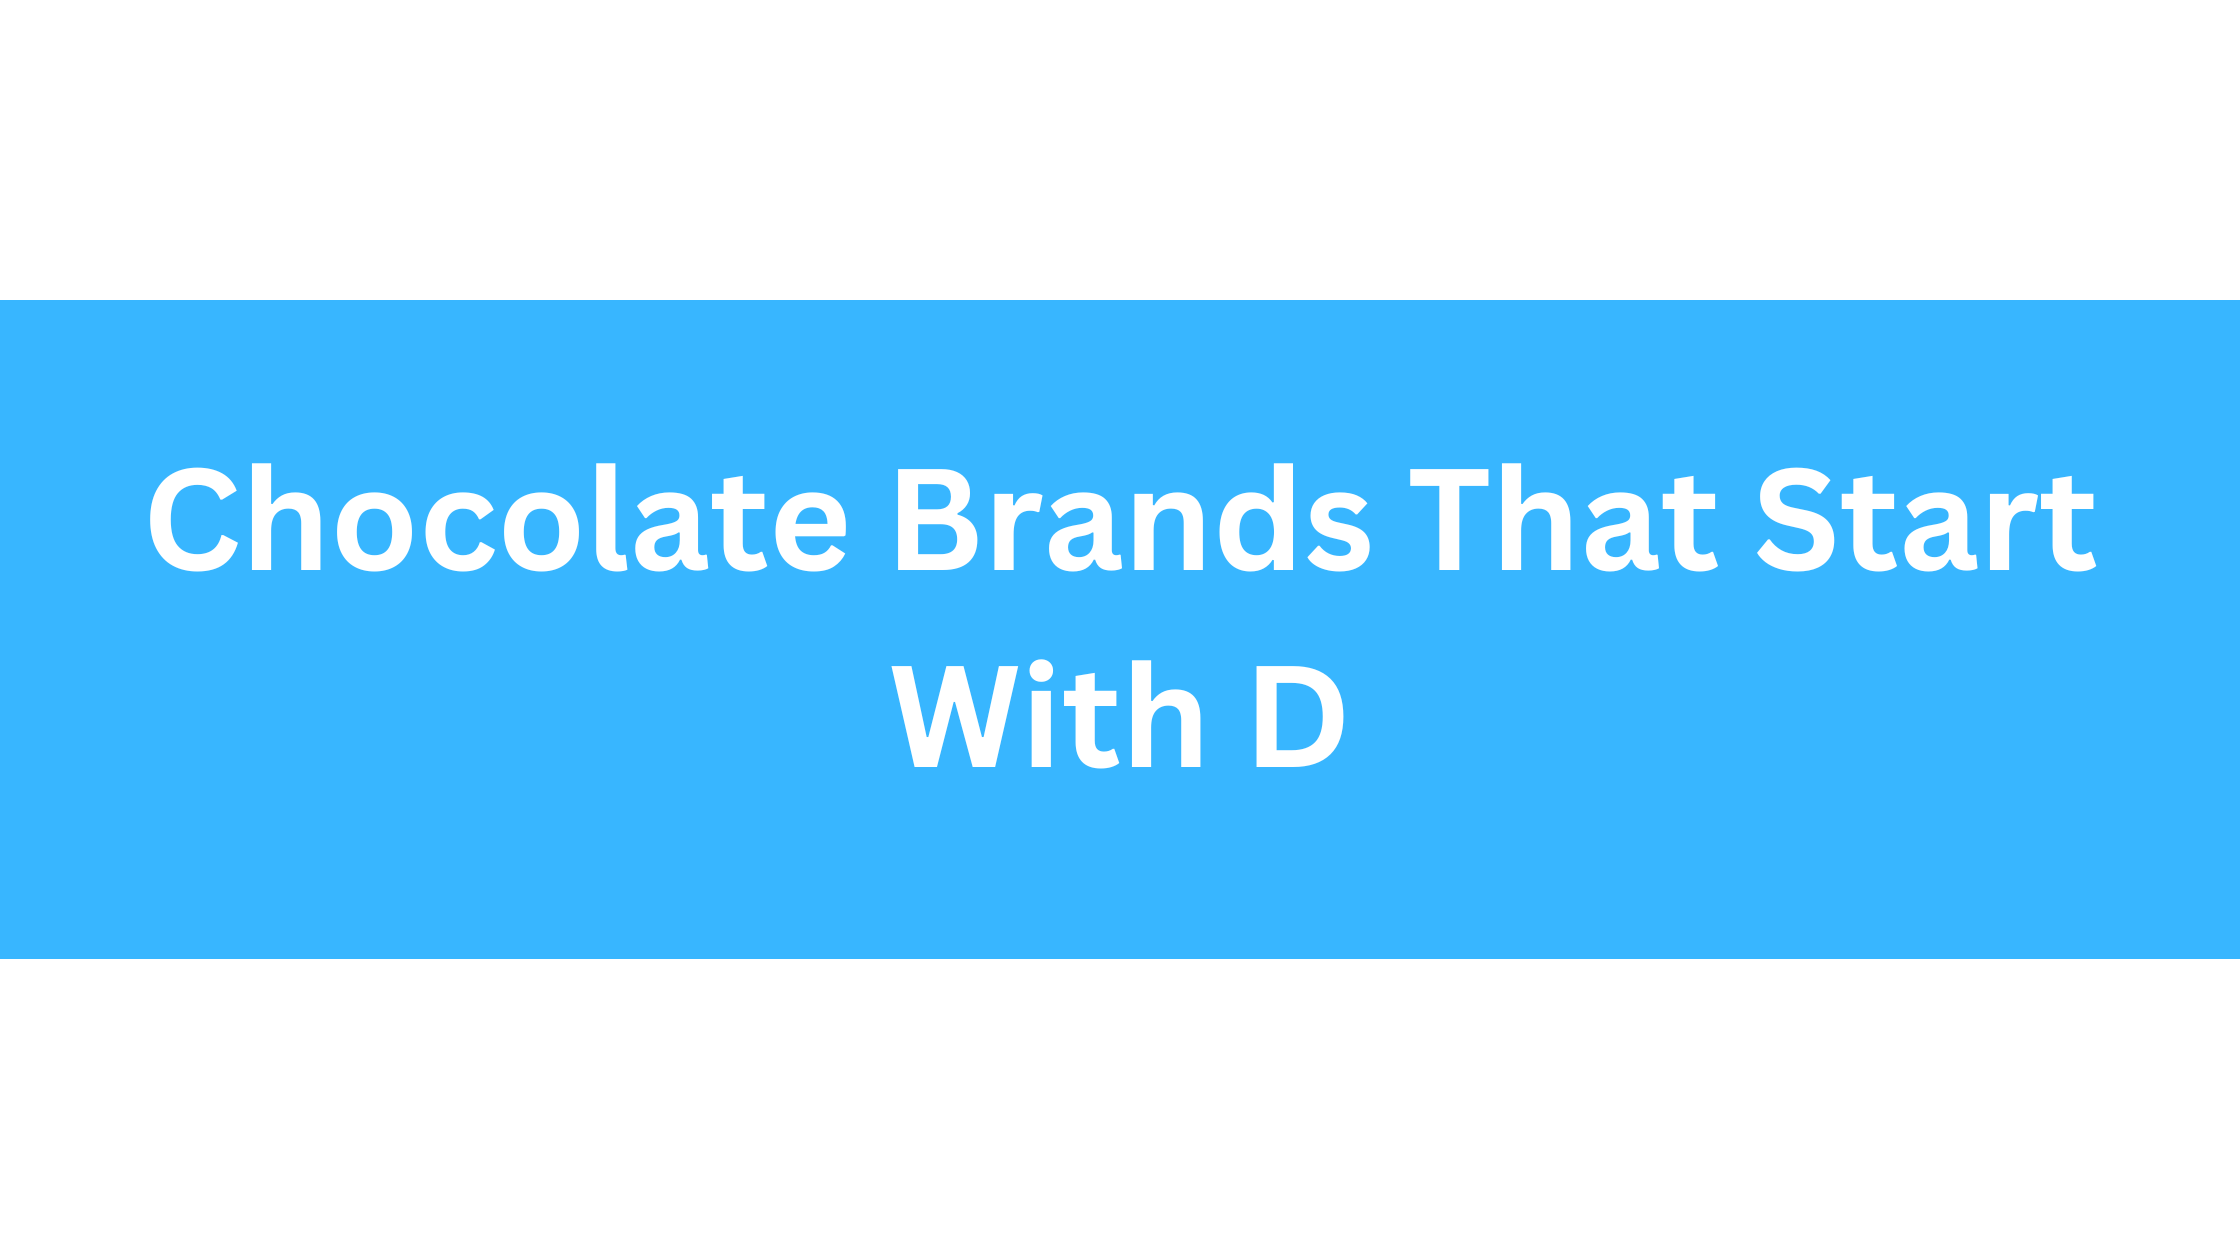 Chocolate Brands That Start With D